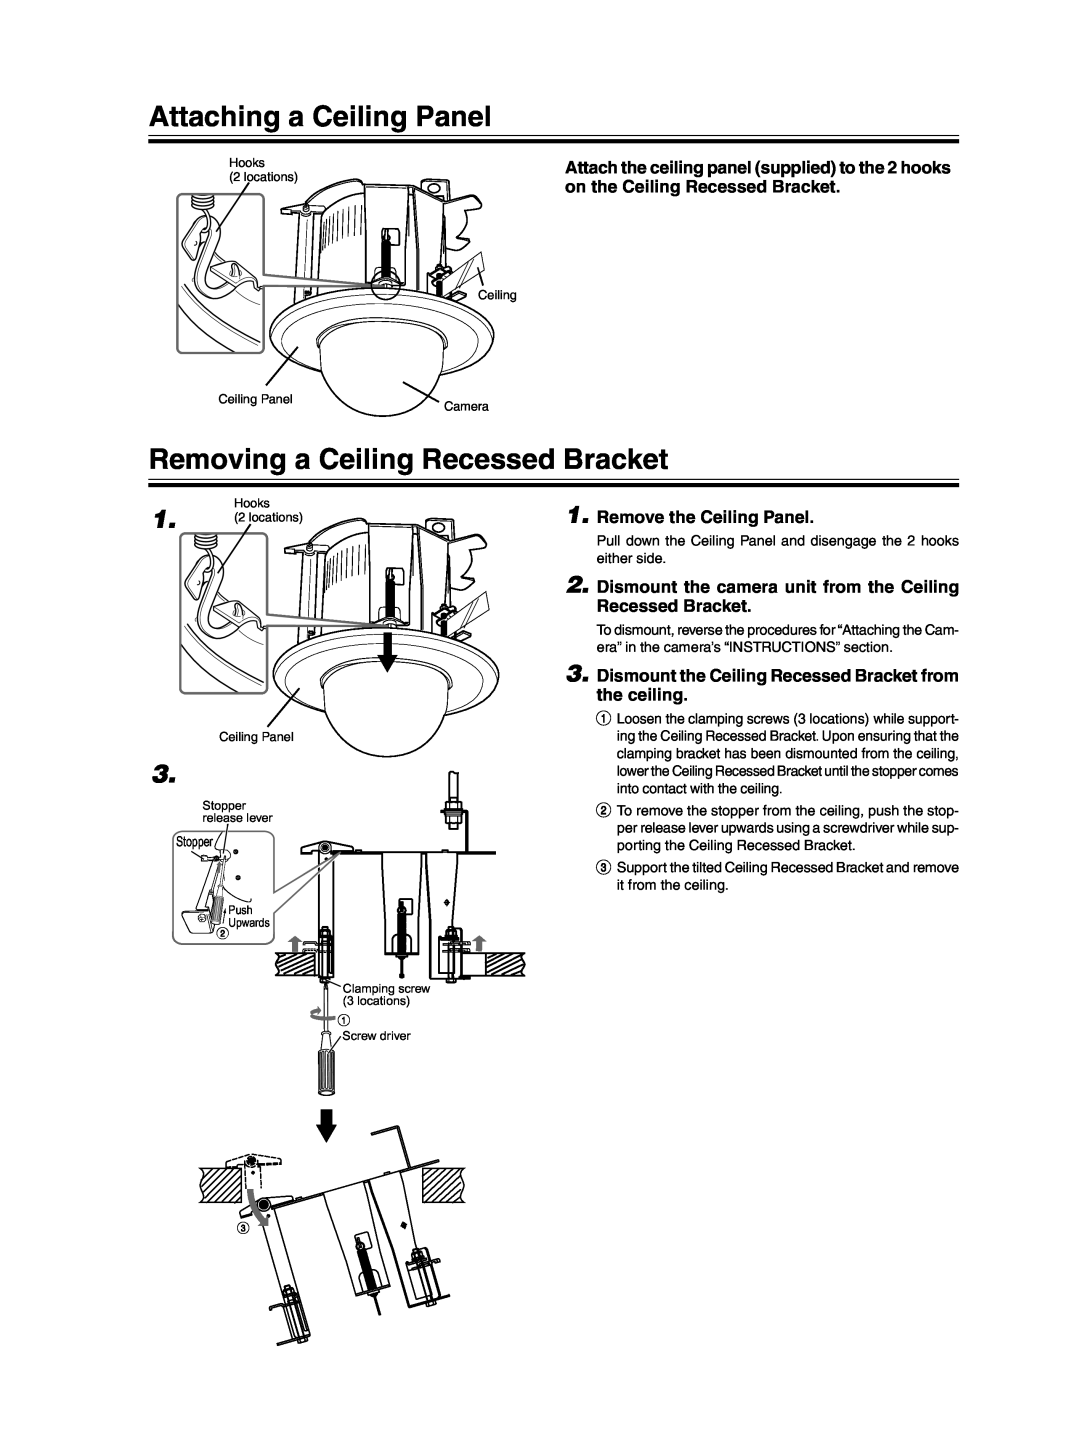 JVC WB-S625U instruction manual Attaching a Ceiling Panel, Removing a Ceiling Recessed Bracket 